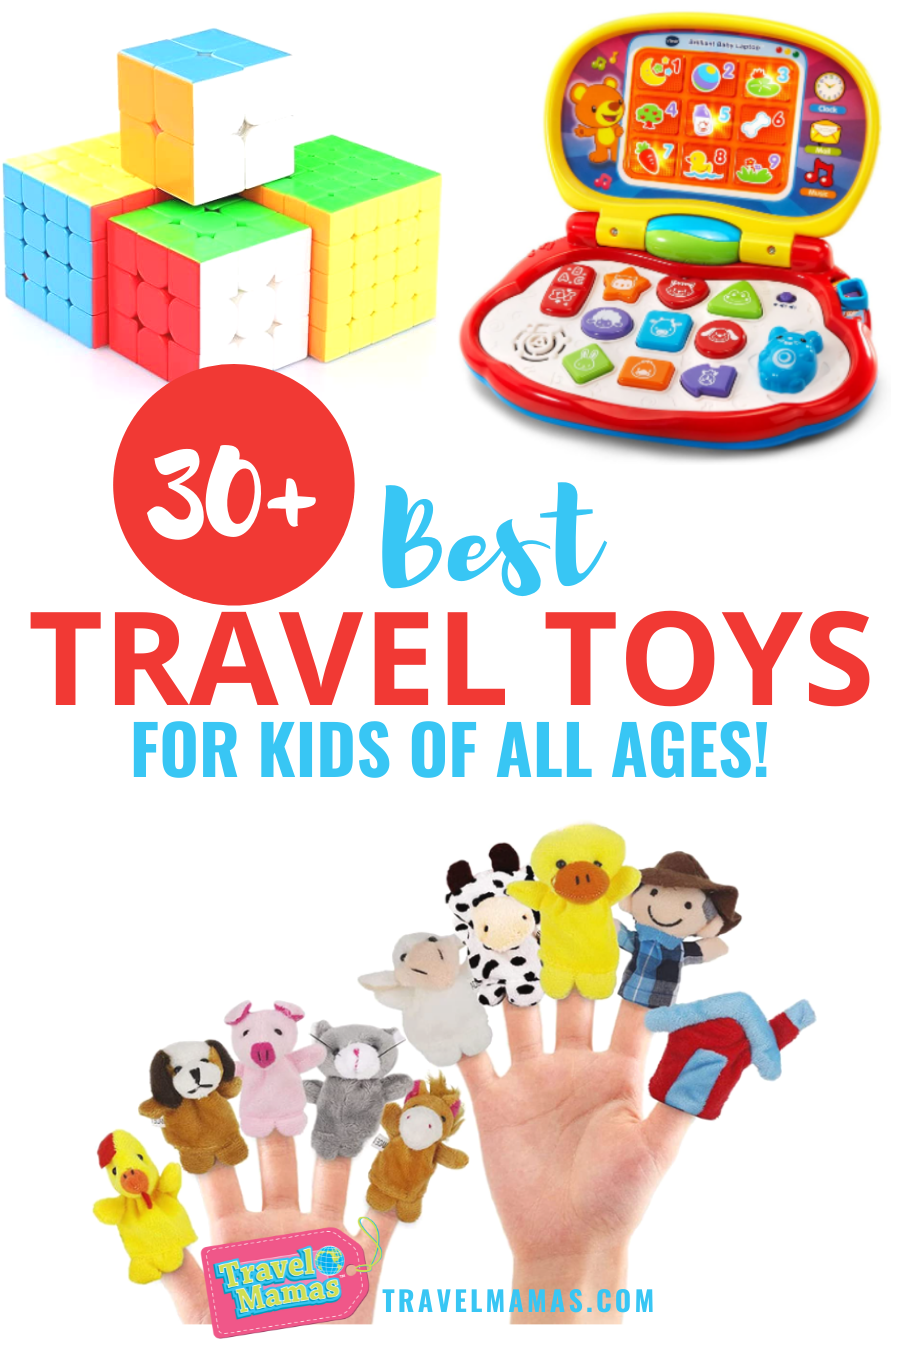 Best Travel Toys: 30+ Toys for Kids from Babies to Teens